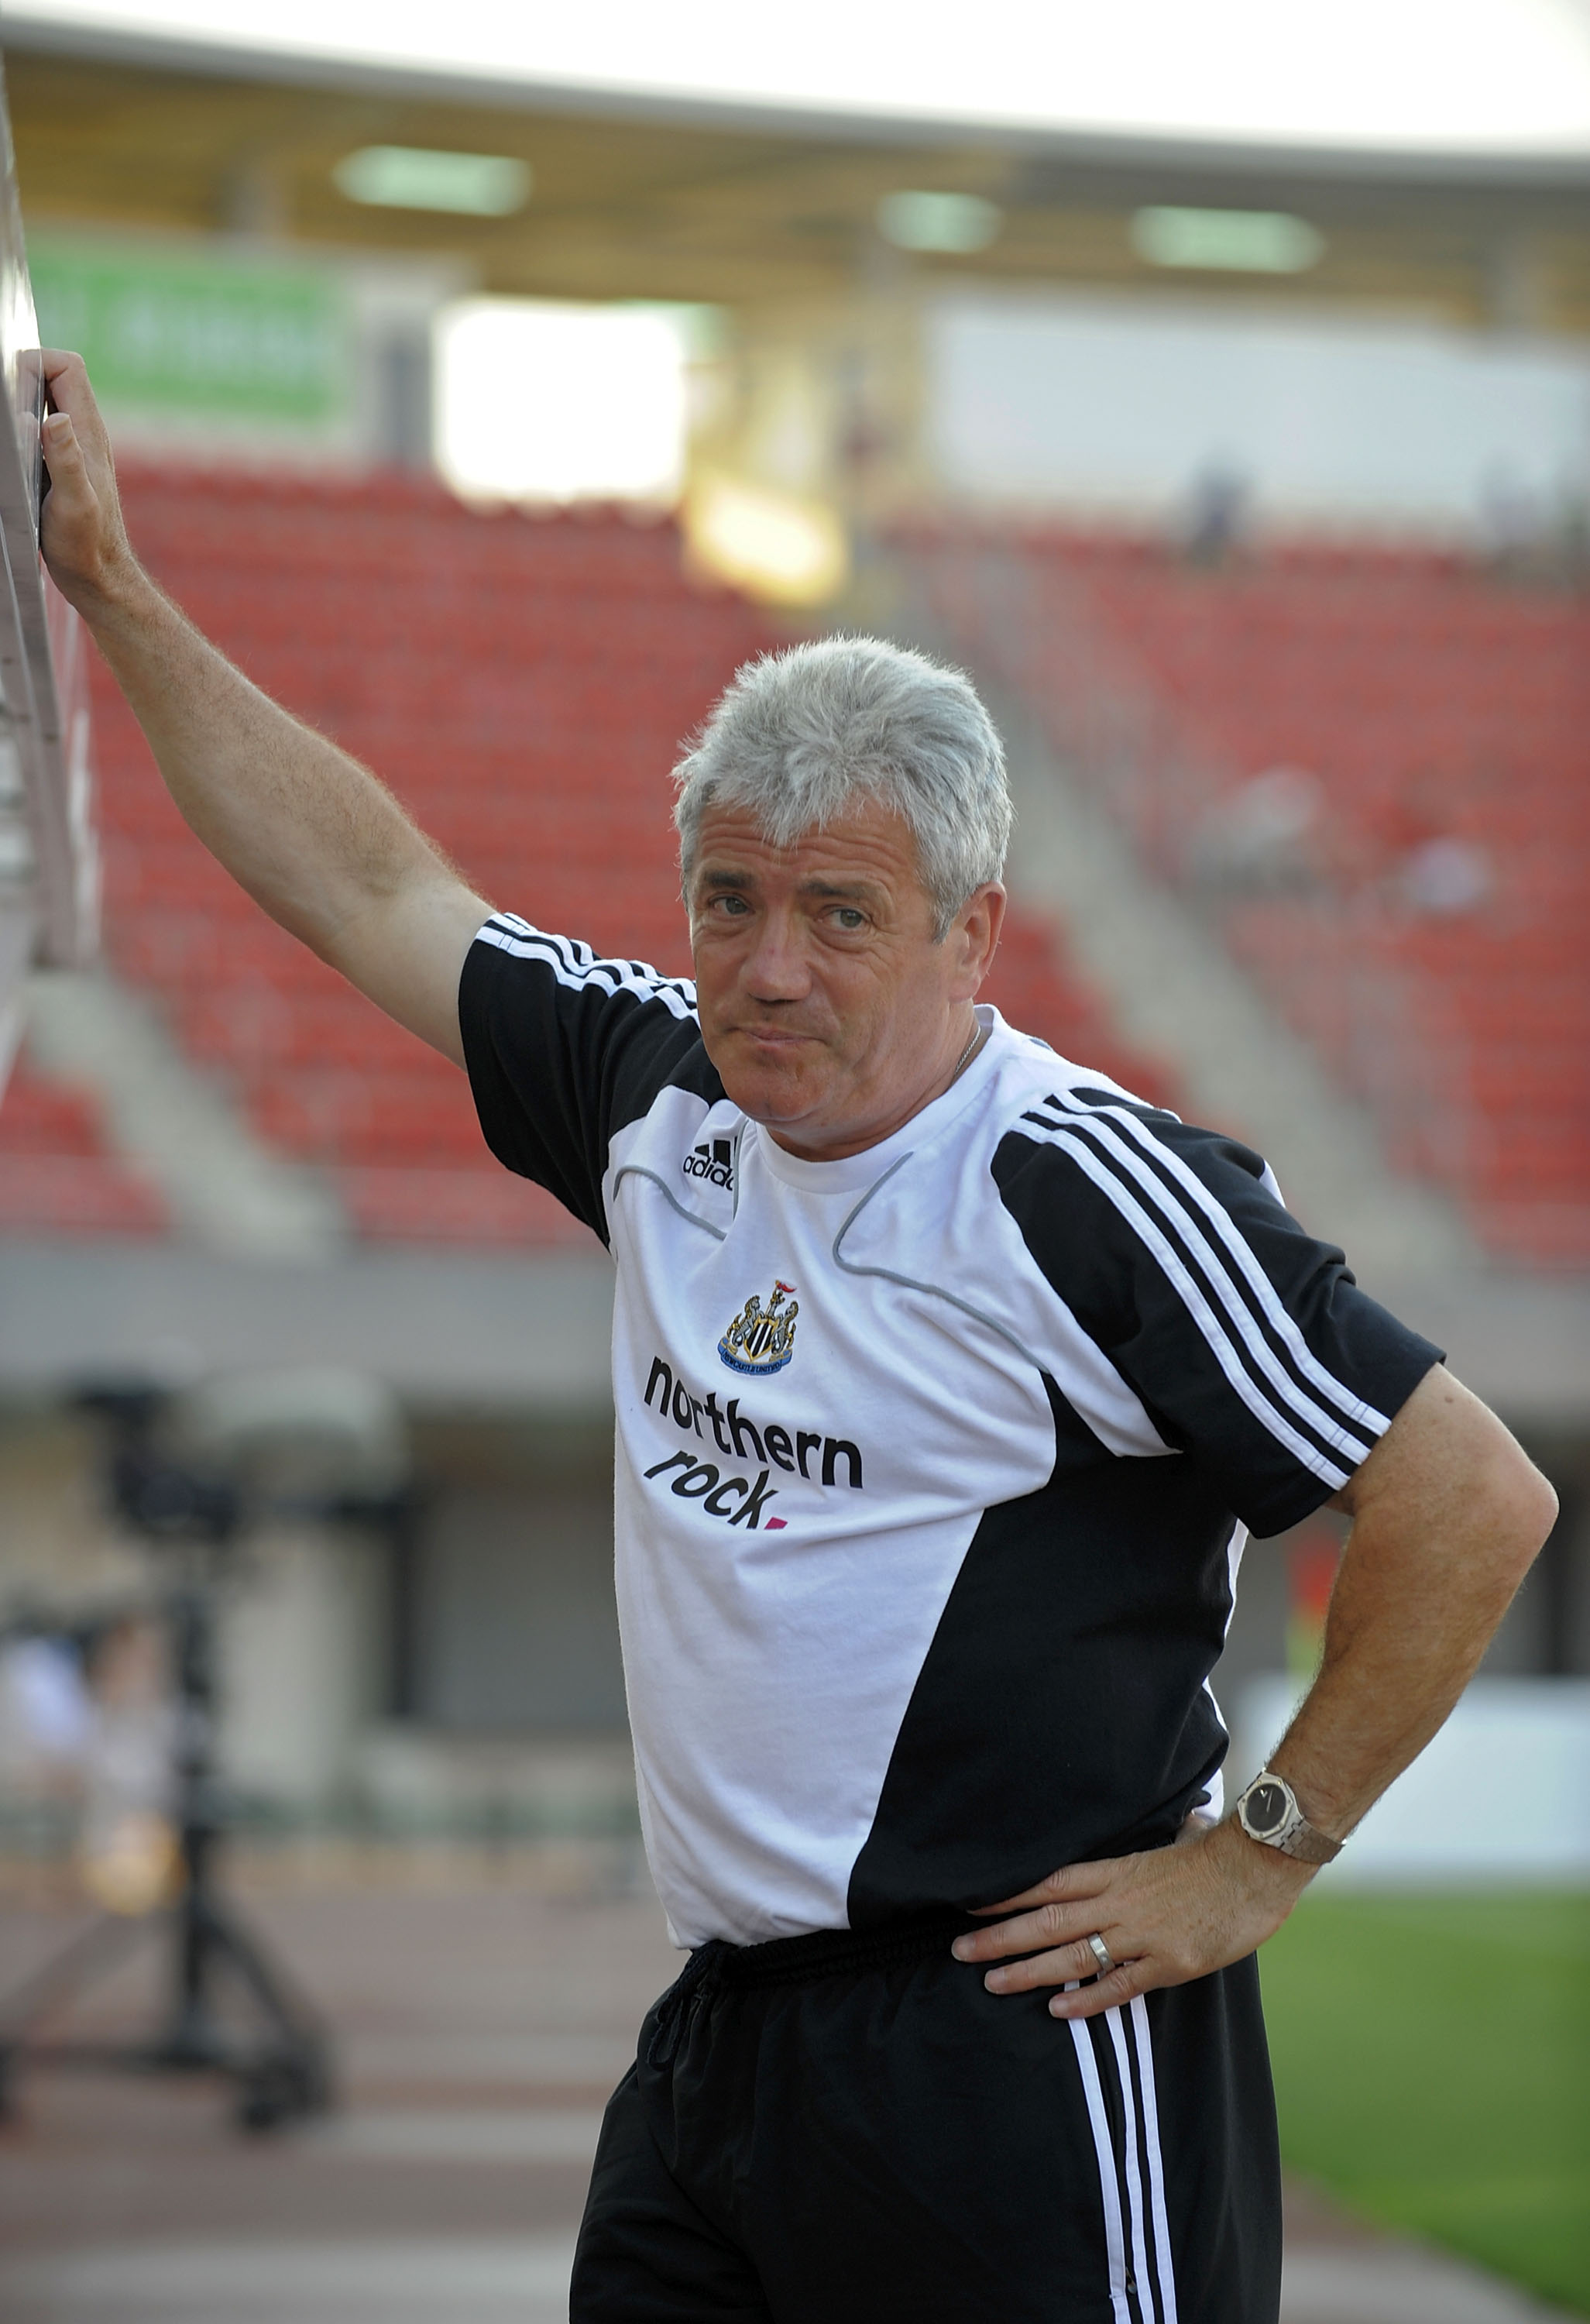 PALMA DE MALLORCA, SPAIN - AUGUST 01:  Newcastle United manager Kevin Keegan watches his side warm-up before the pre-season friendly match between Hertha Berlin and Newcastle United at the Ono stadium on August 1, 2008 in Palma de Mallorca, Spain.  (Photo